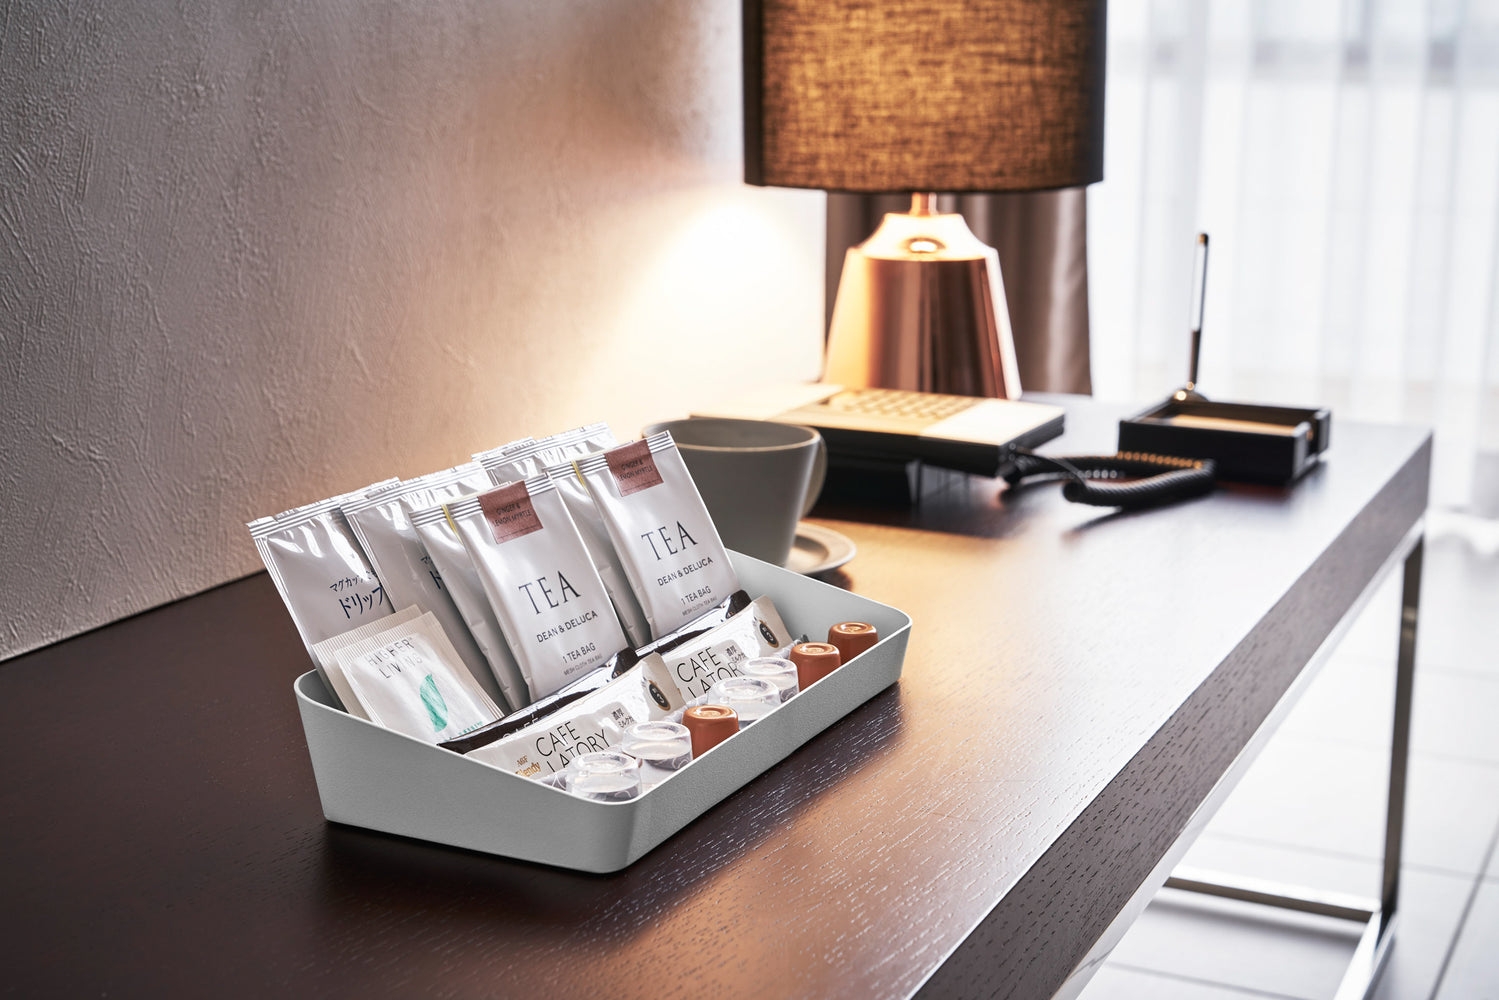 View 13 - Side view of white Accessory Tray holding tea bags and espresso pods on desk by Yamazaki Home.